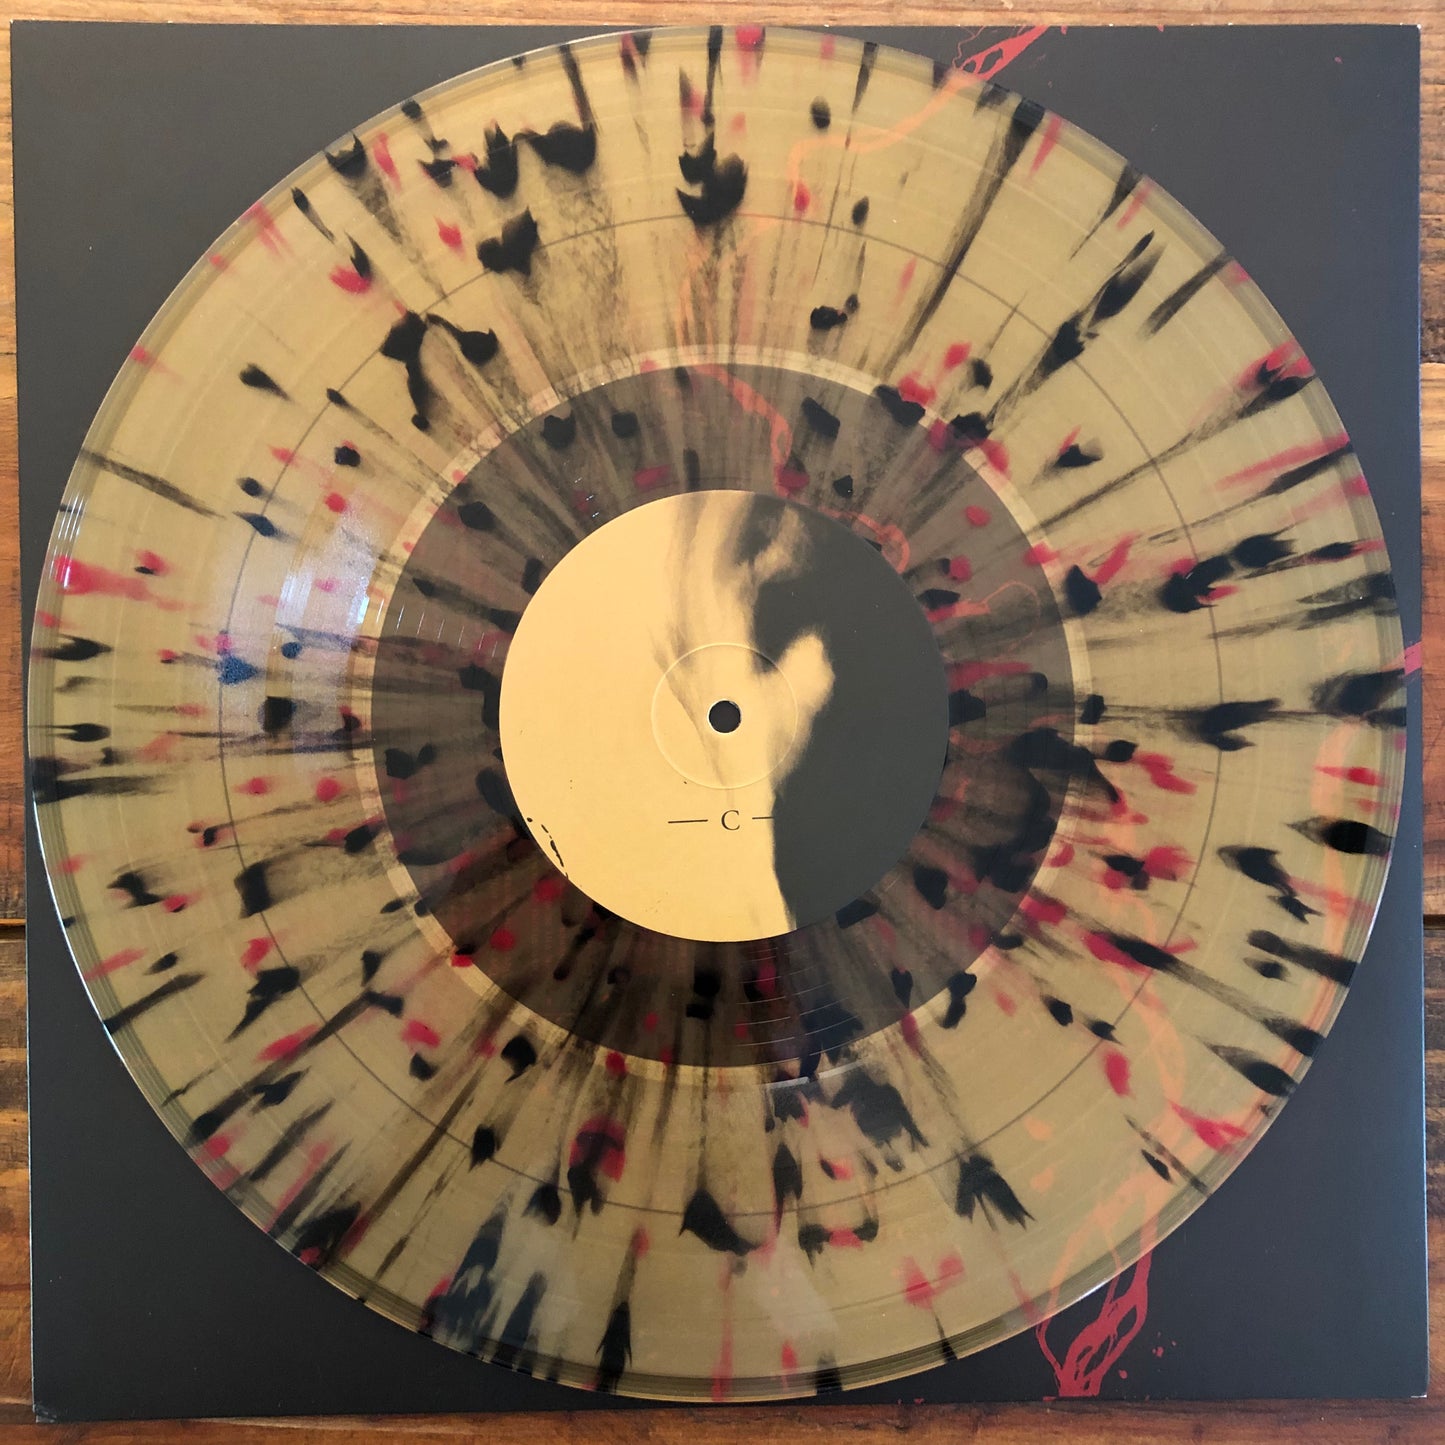 Ulcerate, "Shrines of Paralysis" (Gold w/ Red & Black Splatter) [Used]